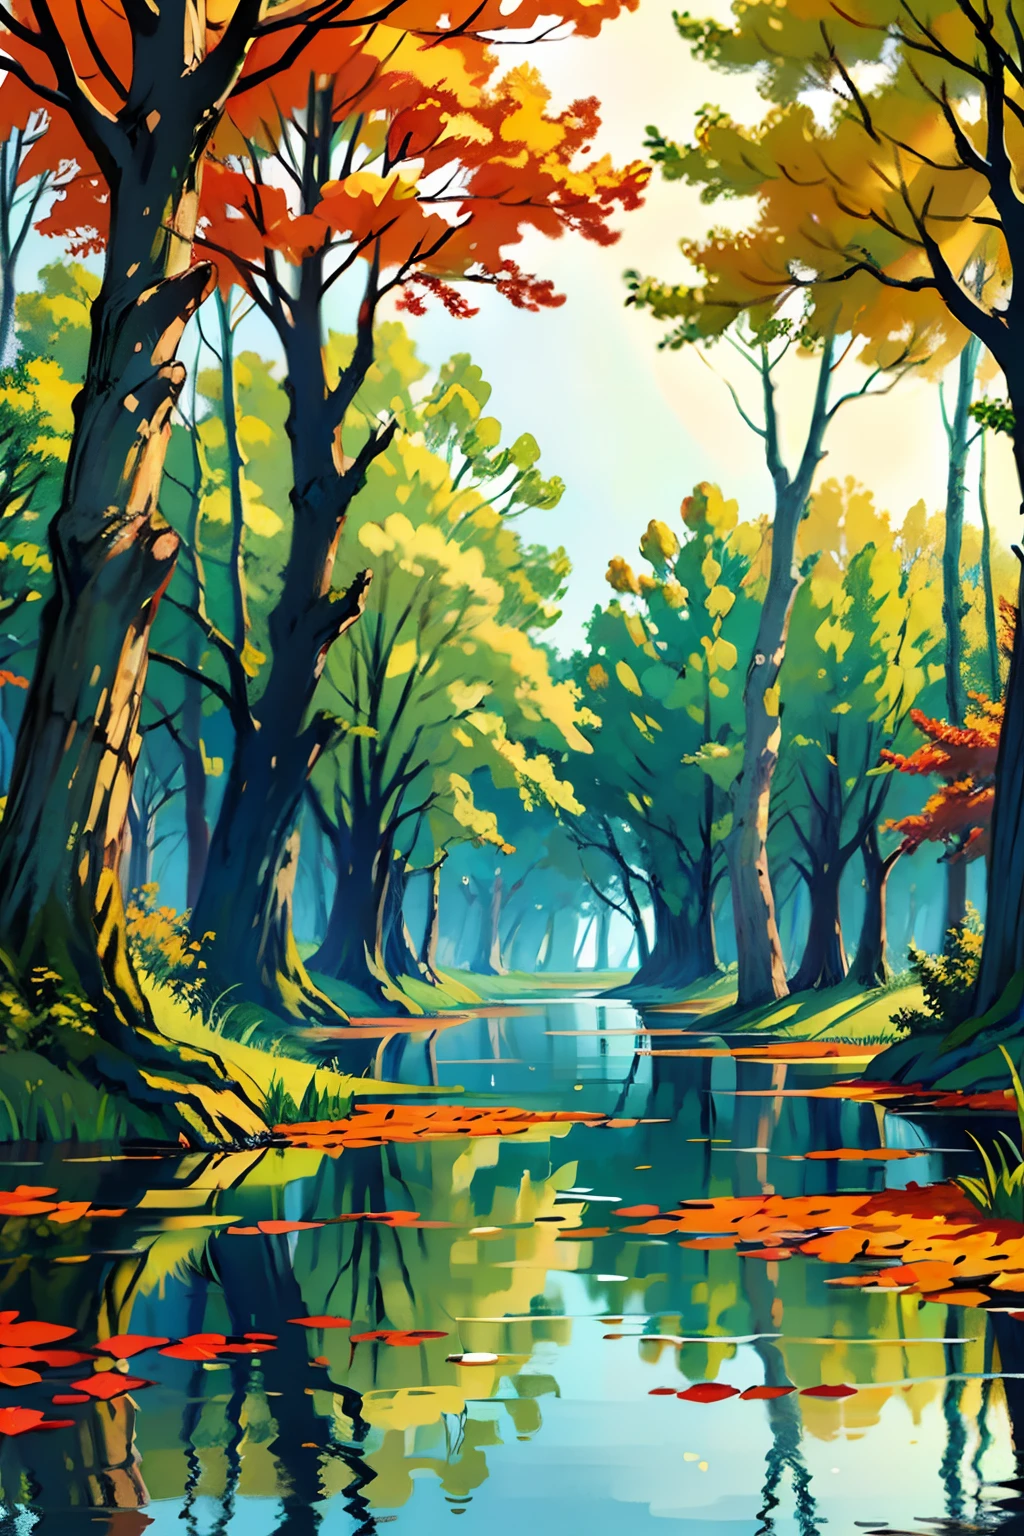 A painting of an autumn landscape, green trees and autumn trees, a swamp with an alligator, afternoon light.